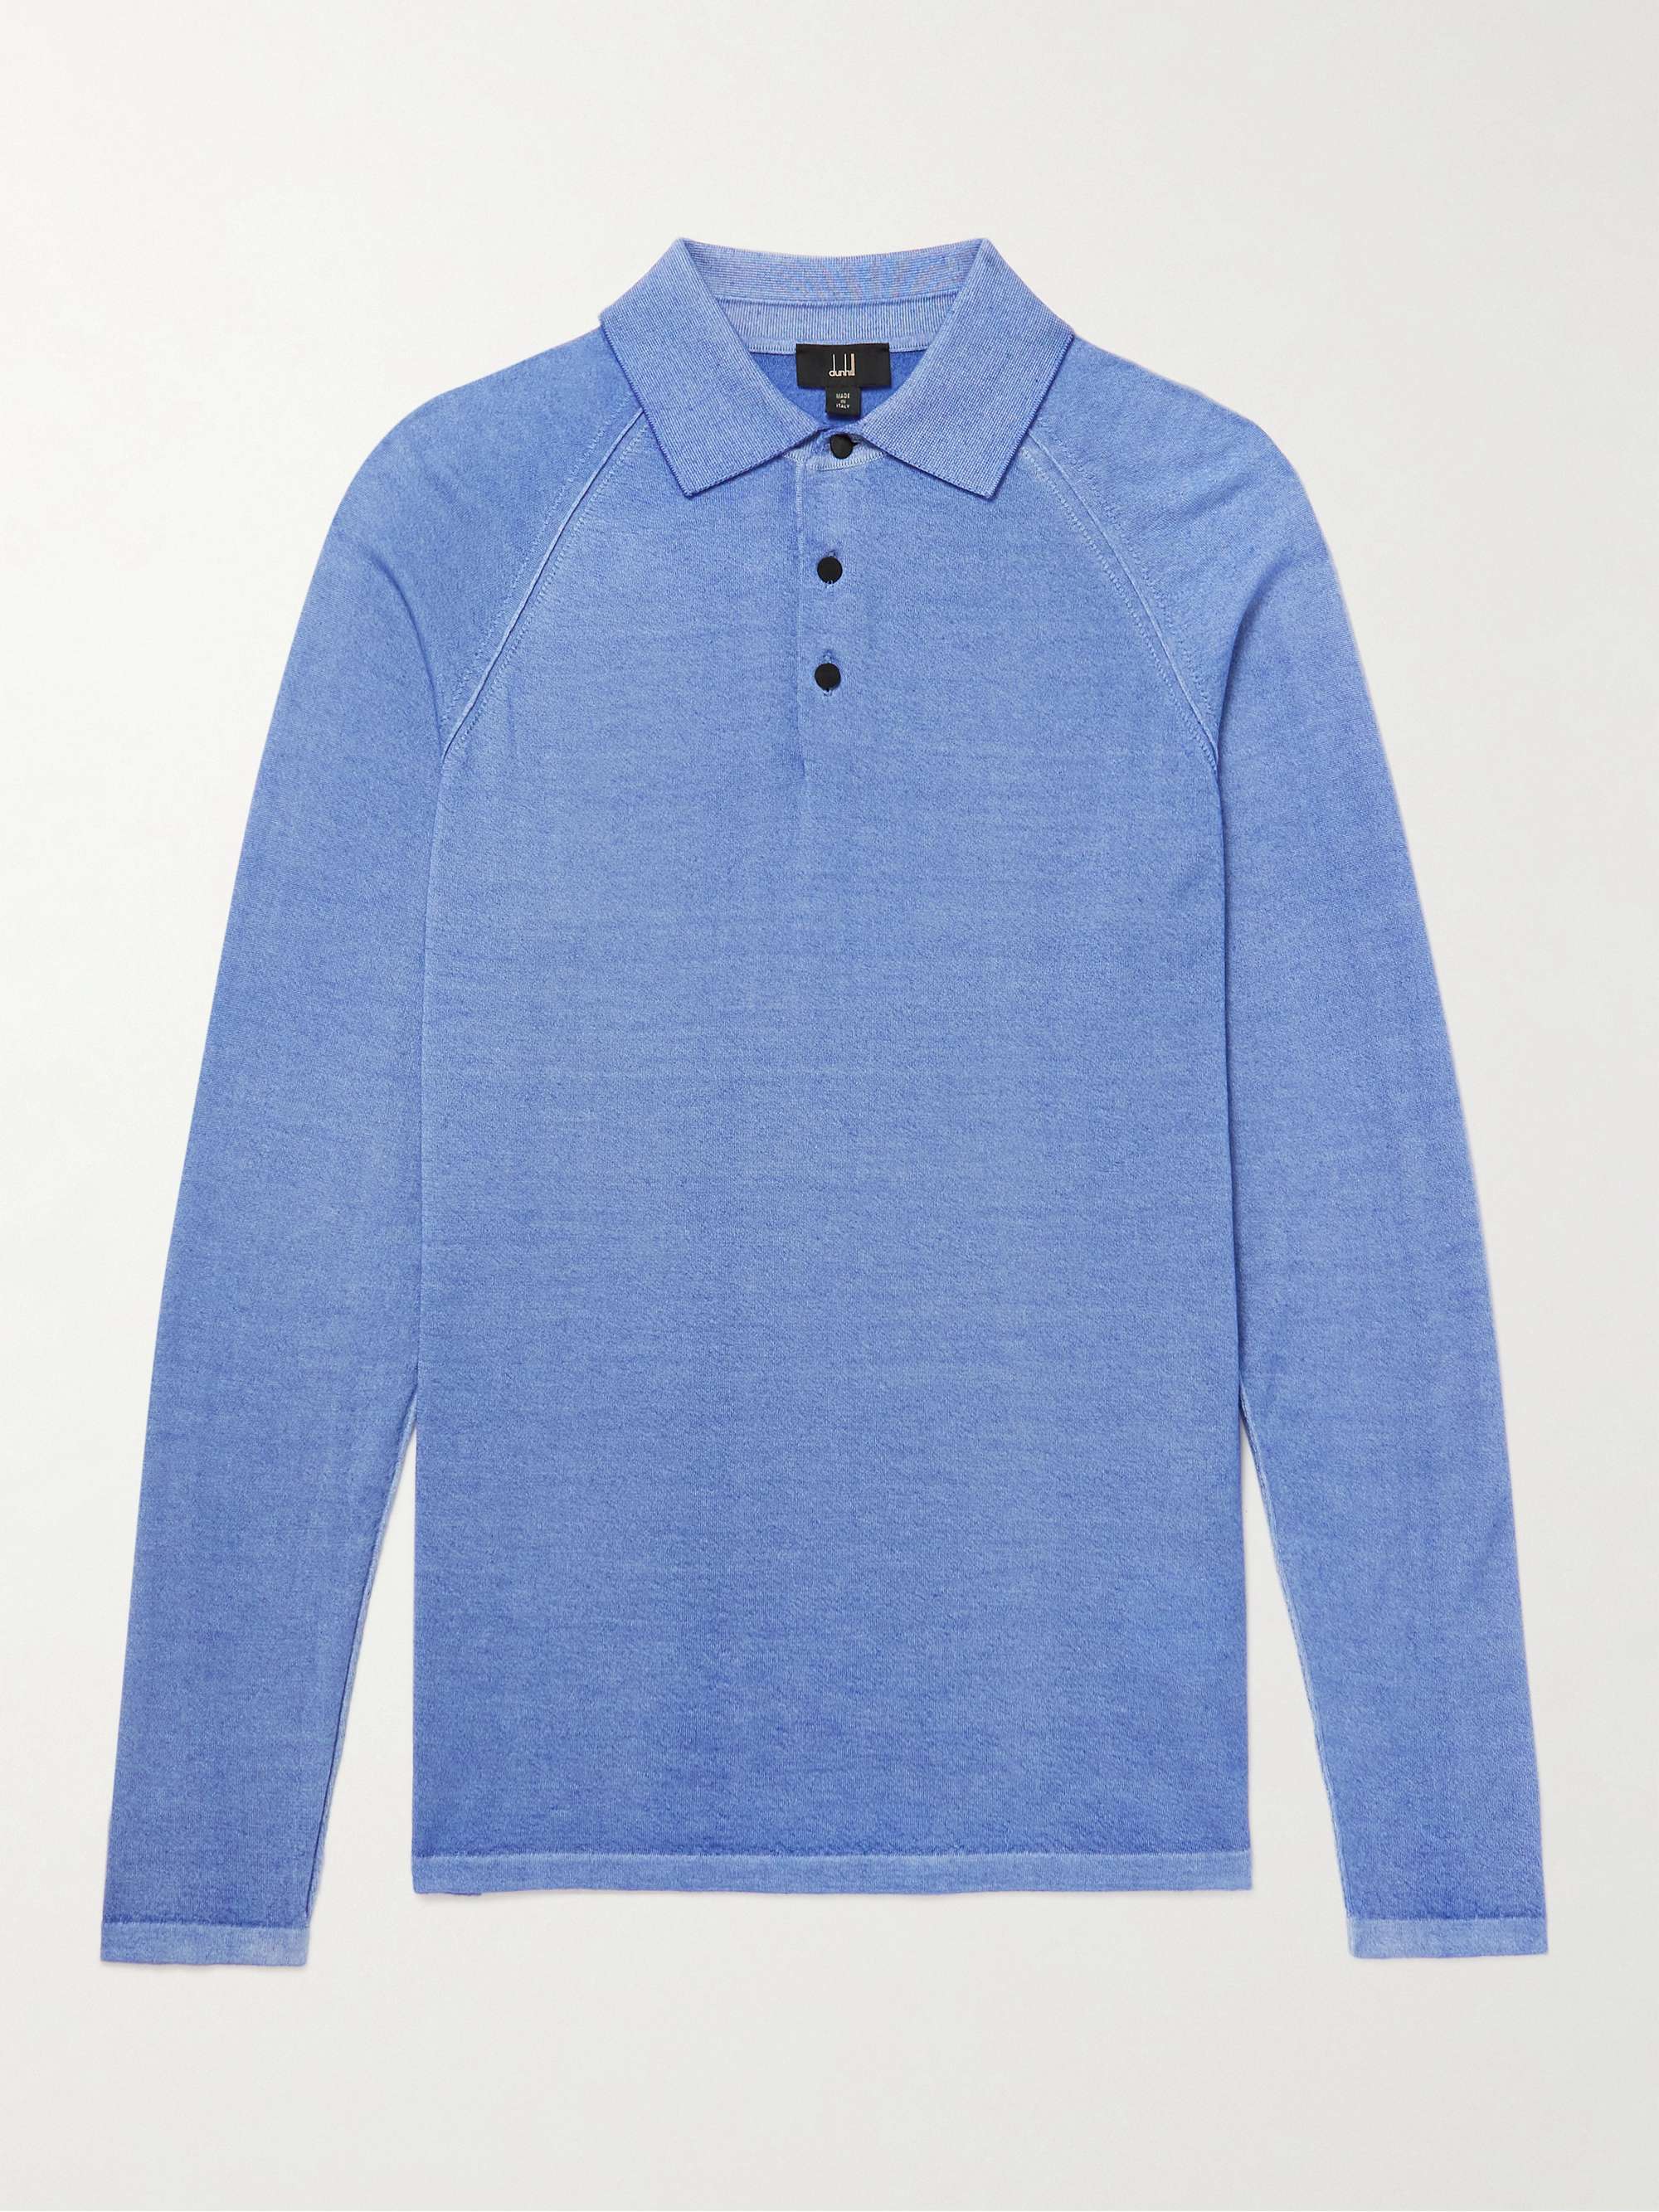 DUNHILL Garment-Dyed Cashmere Polo Shirt